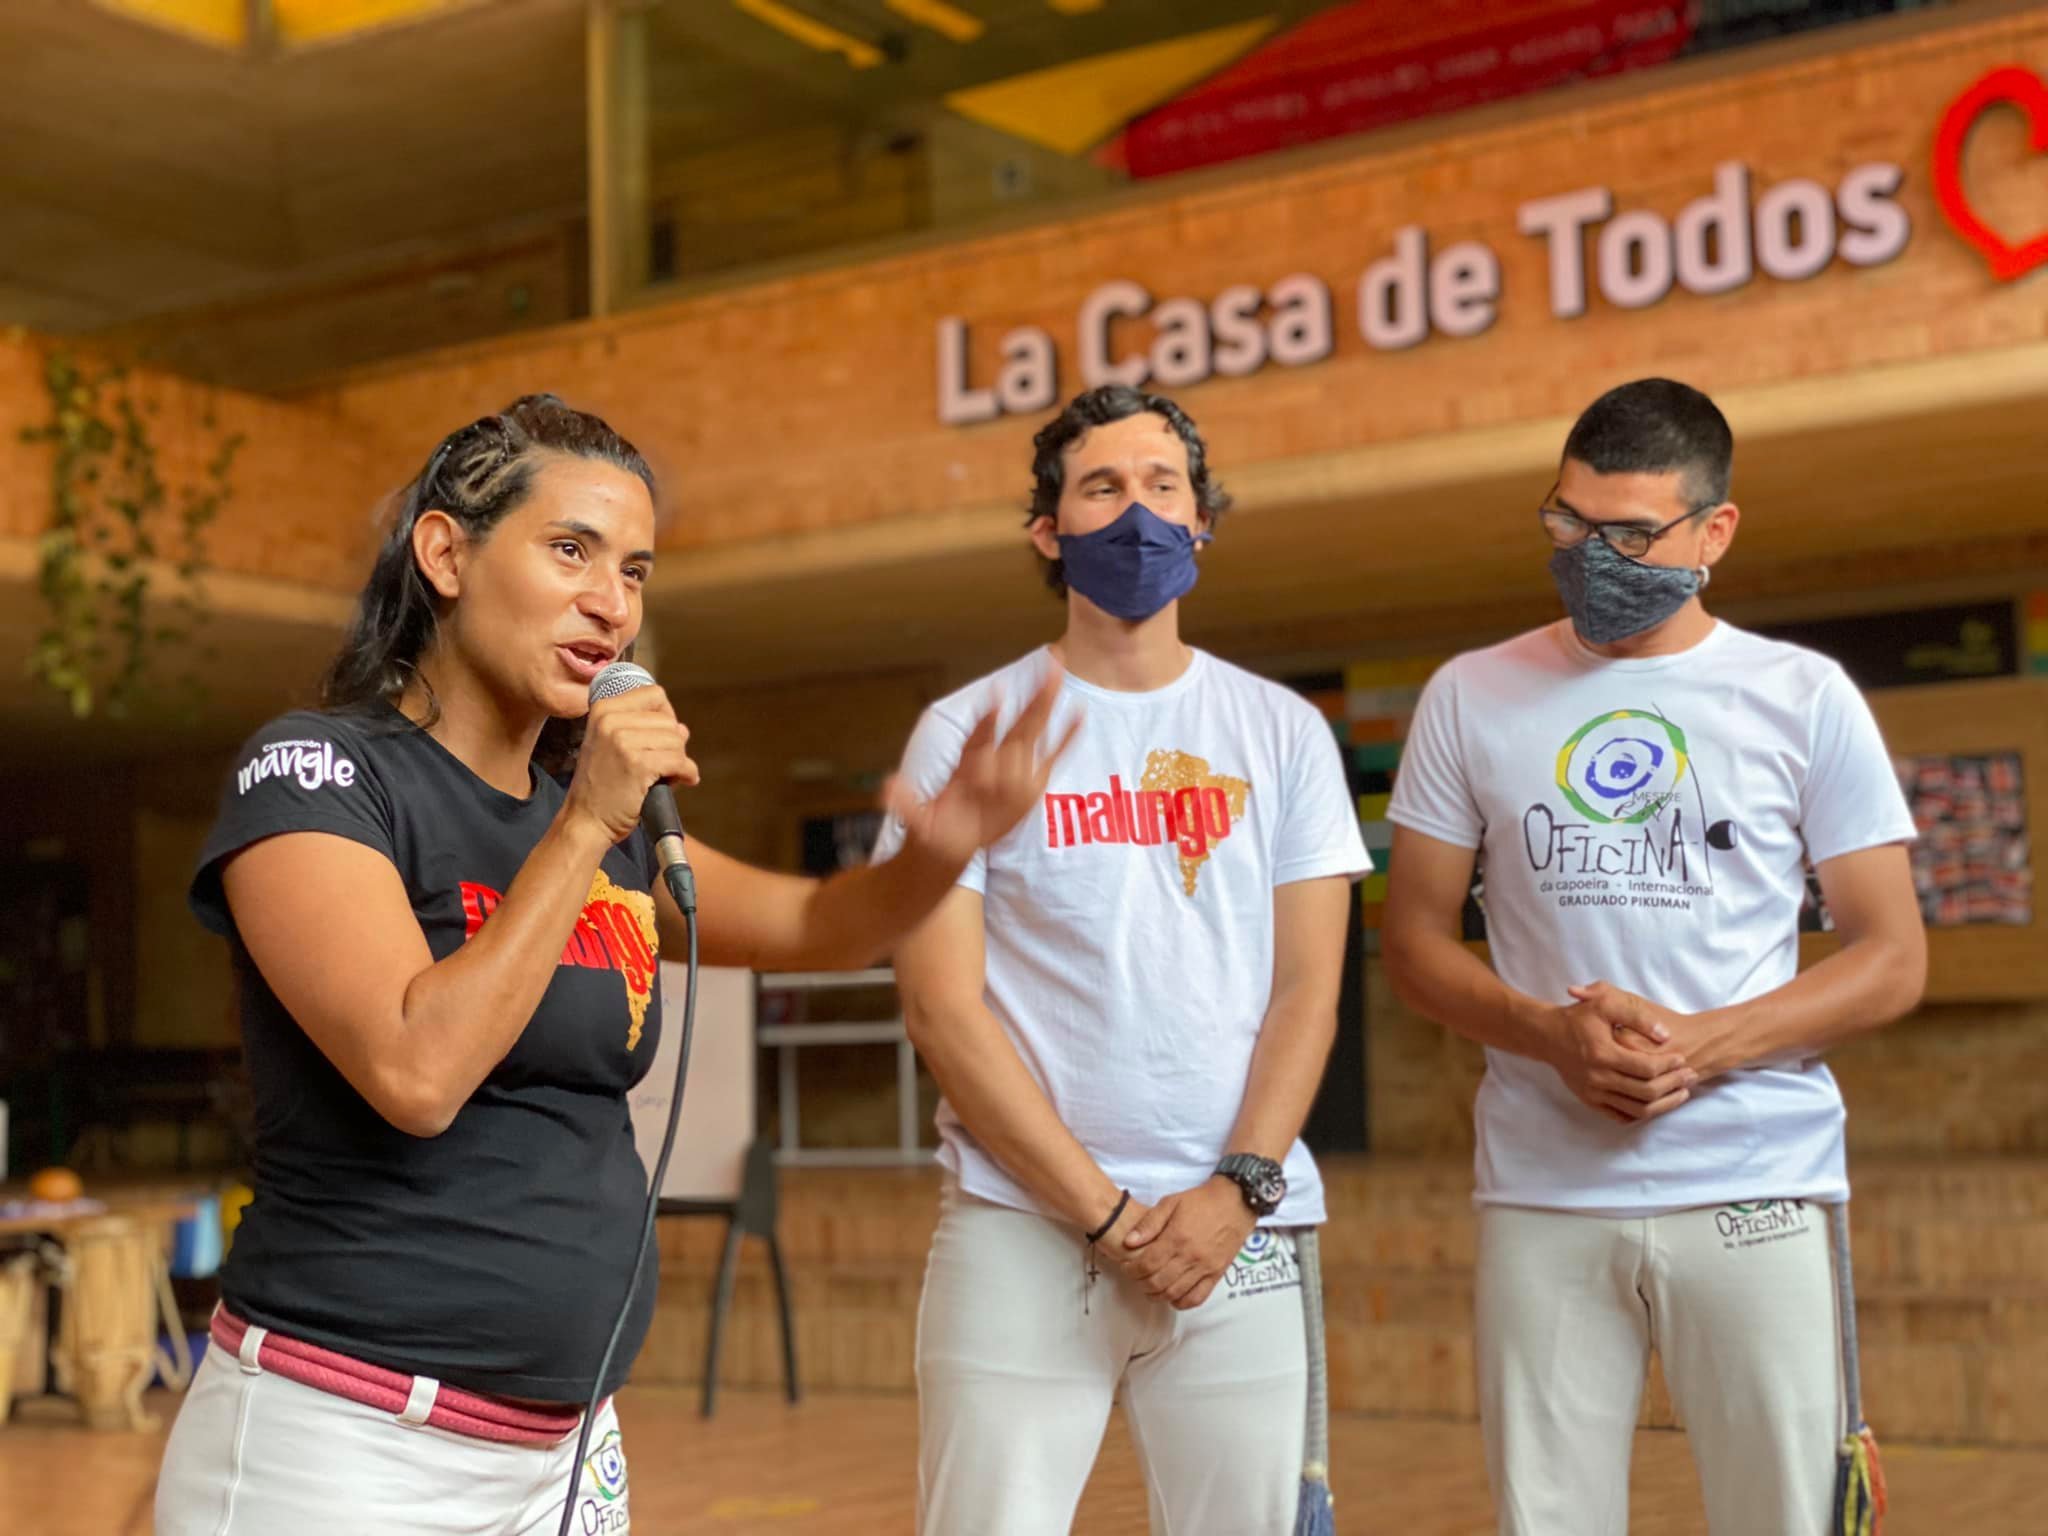  Lina Tobón’s life found meaning when she was introduced to capoeira, a Brazilian dance/martial art. Now she introduces it to community children as a vehicle for fostering self-esteem and opening them to other options. 